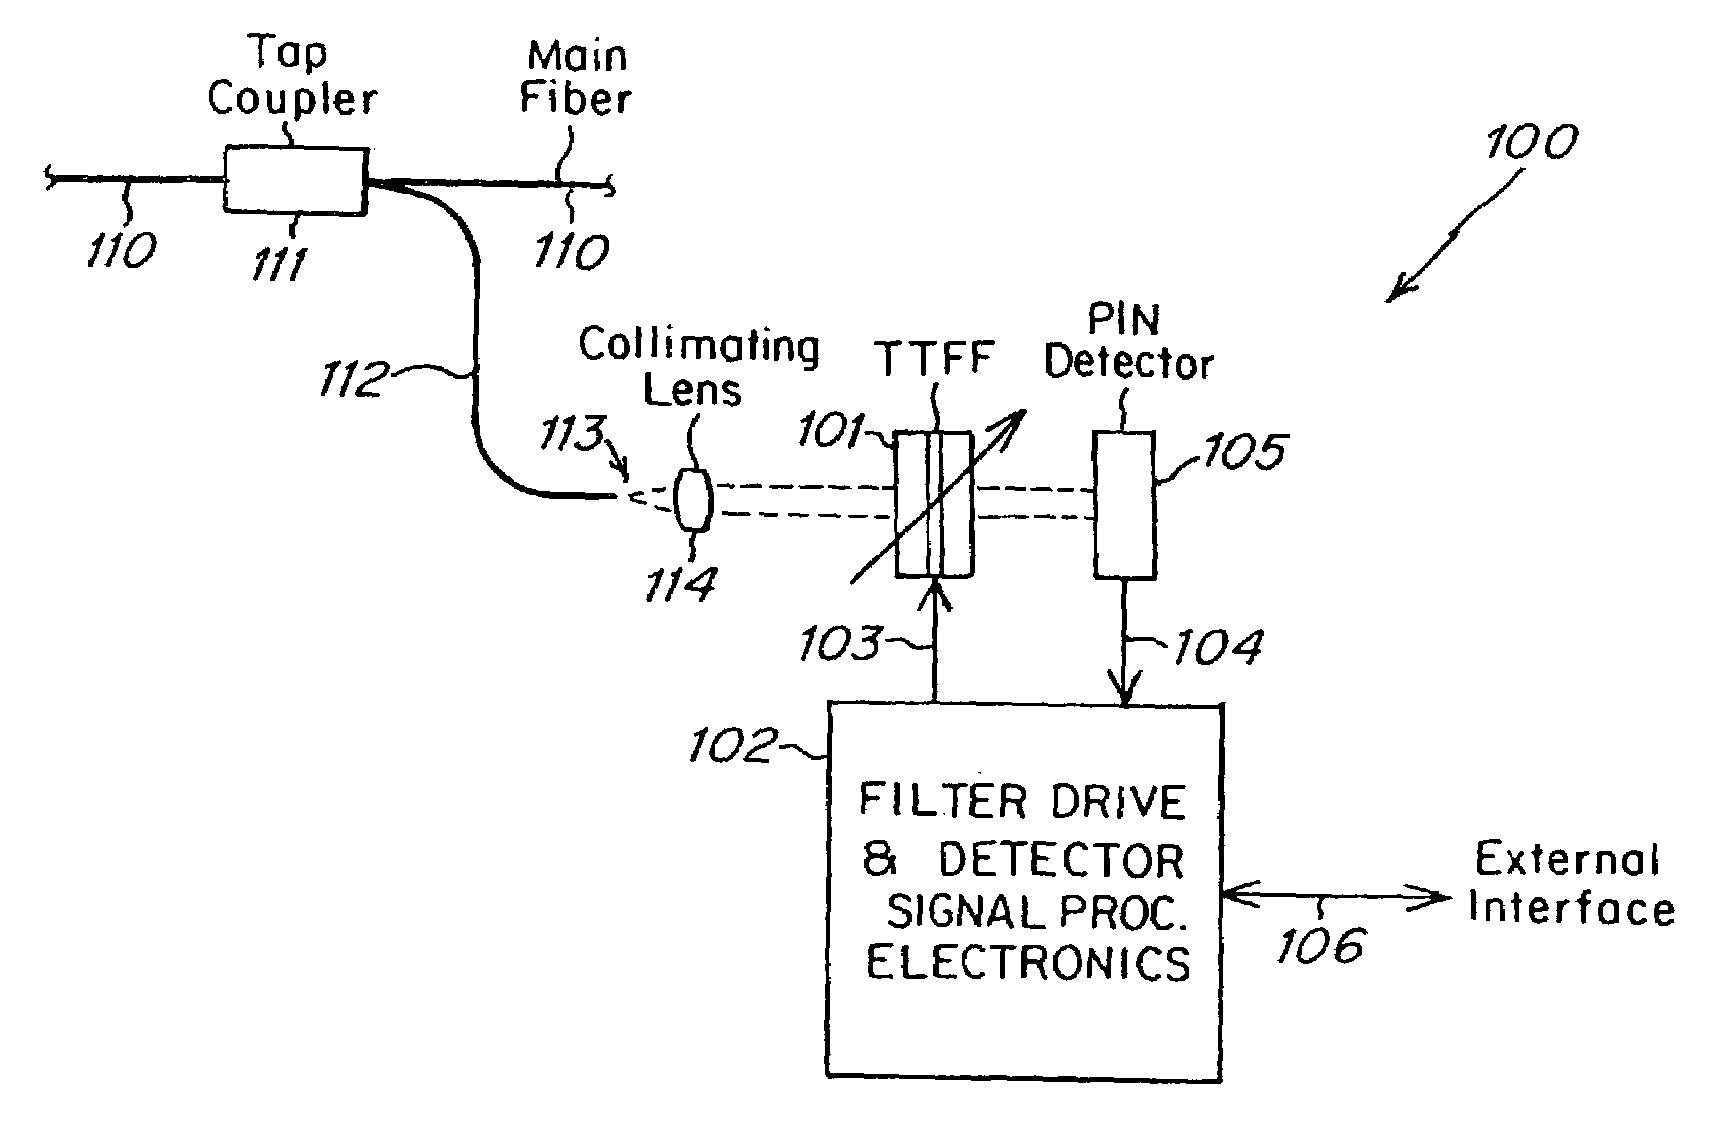 Tunable optical instruments